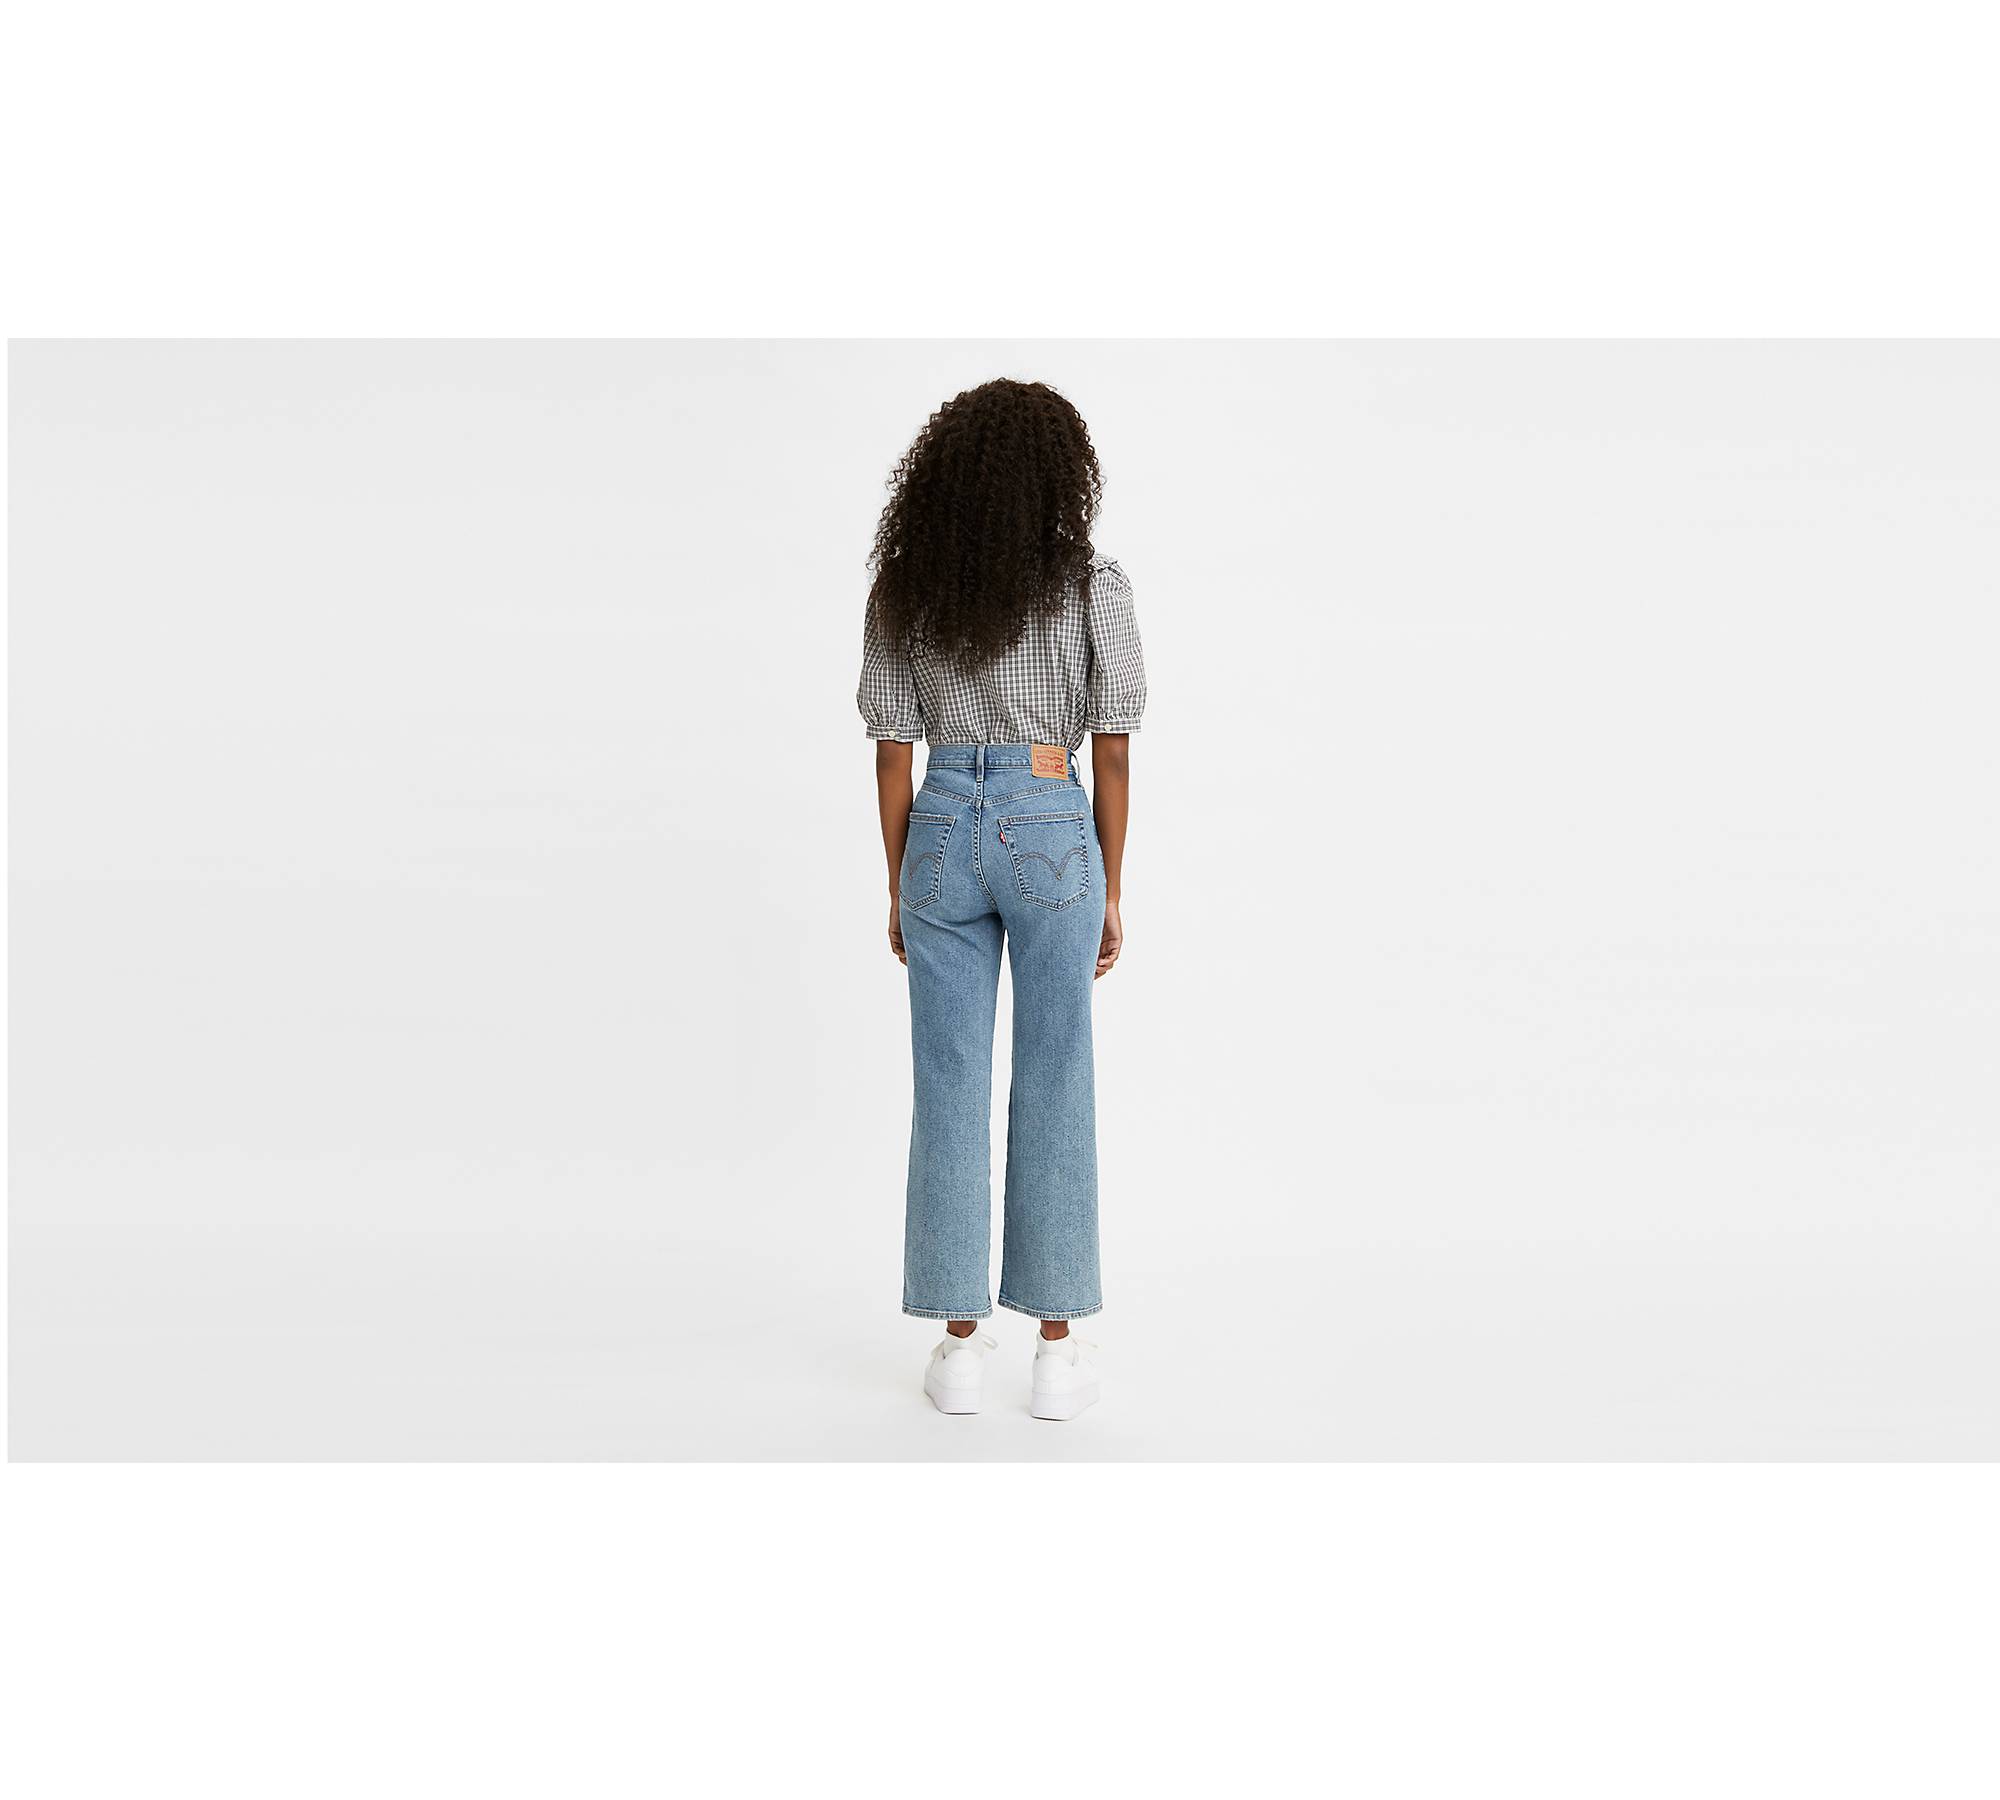 Women's Petite Slim Jeans - High-Rise, Ankled & Flared